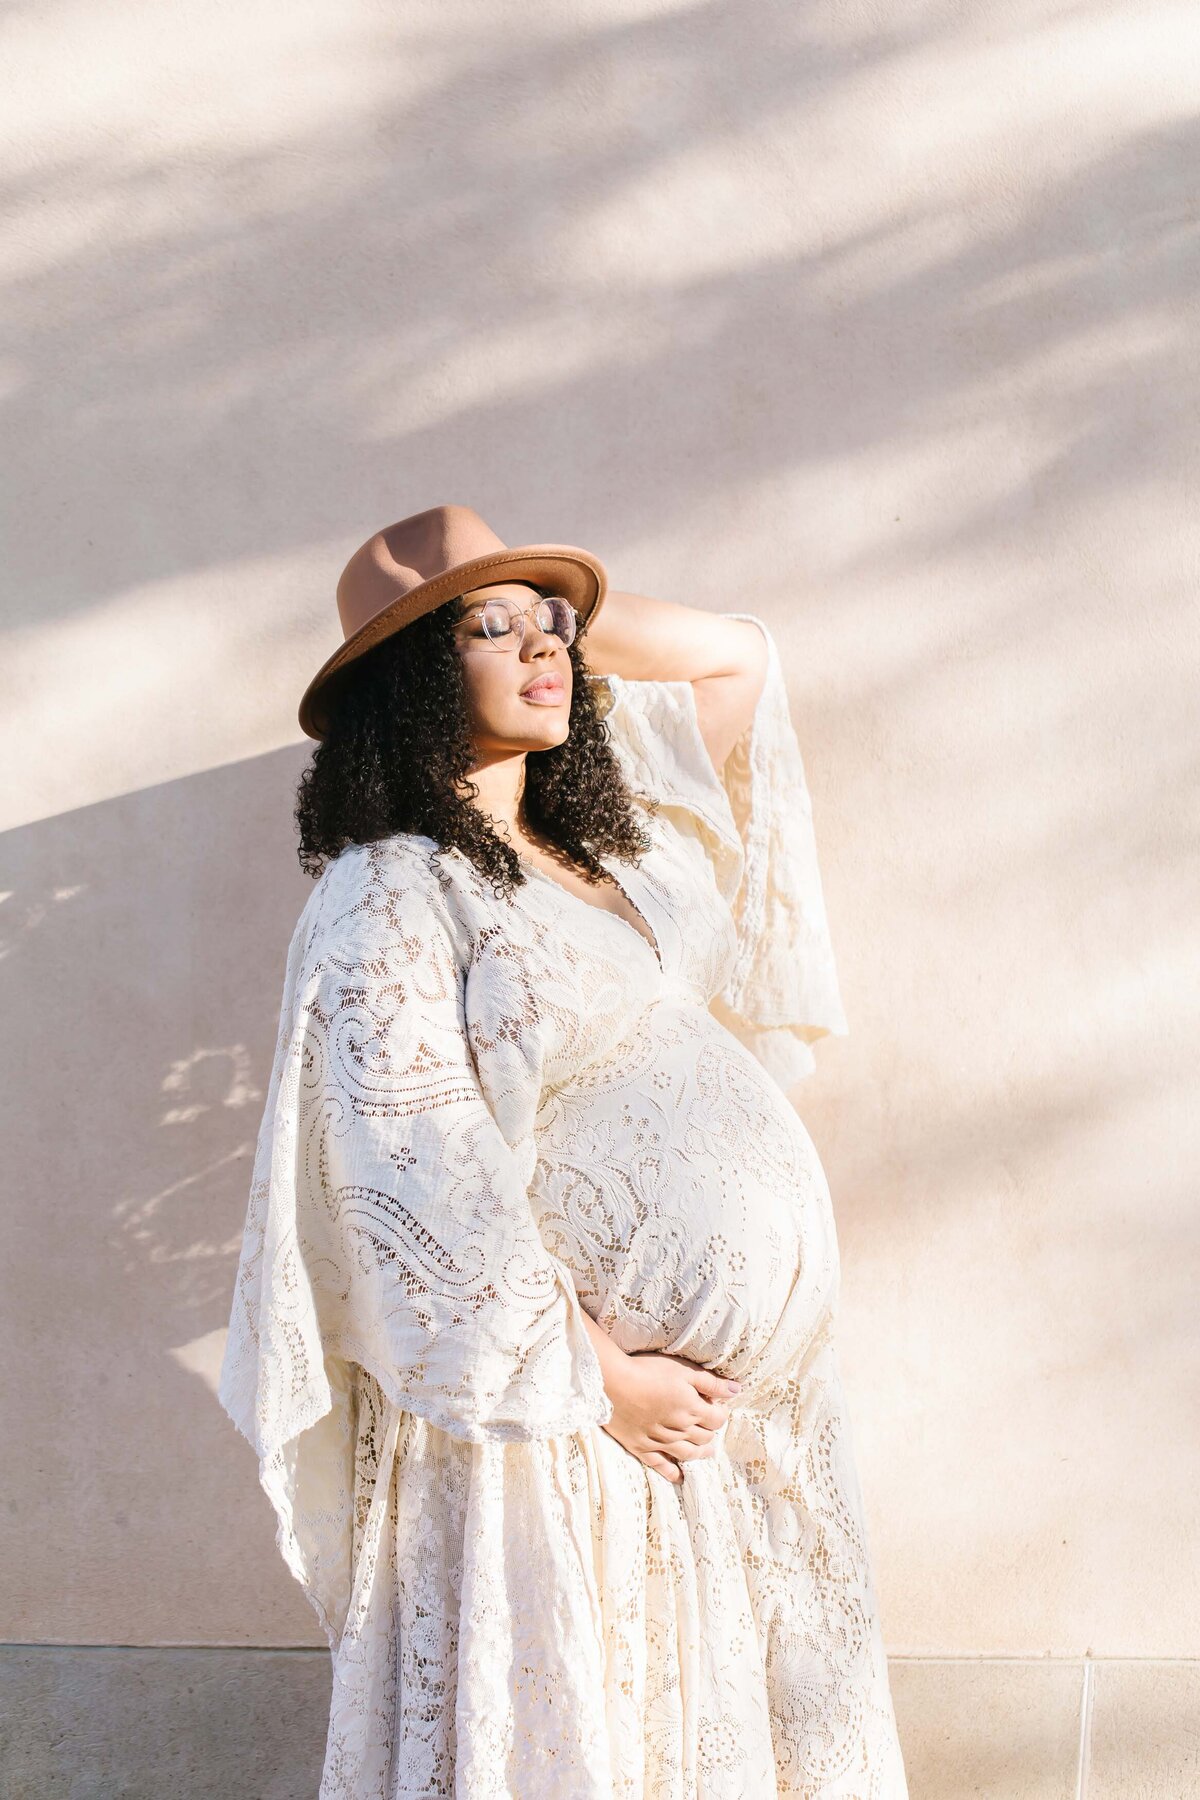 pregnant woman with hat on  with closed eyes basking in sun